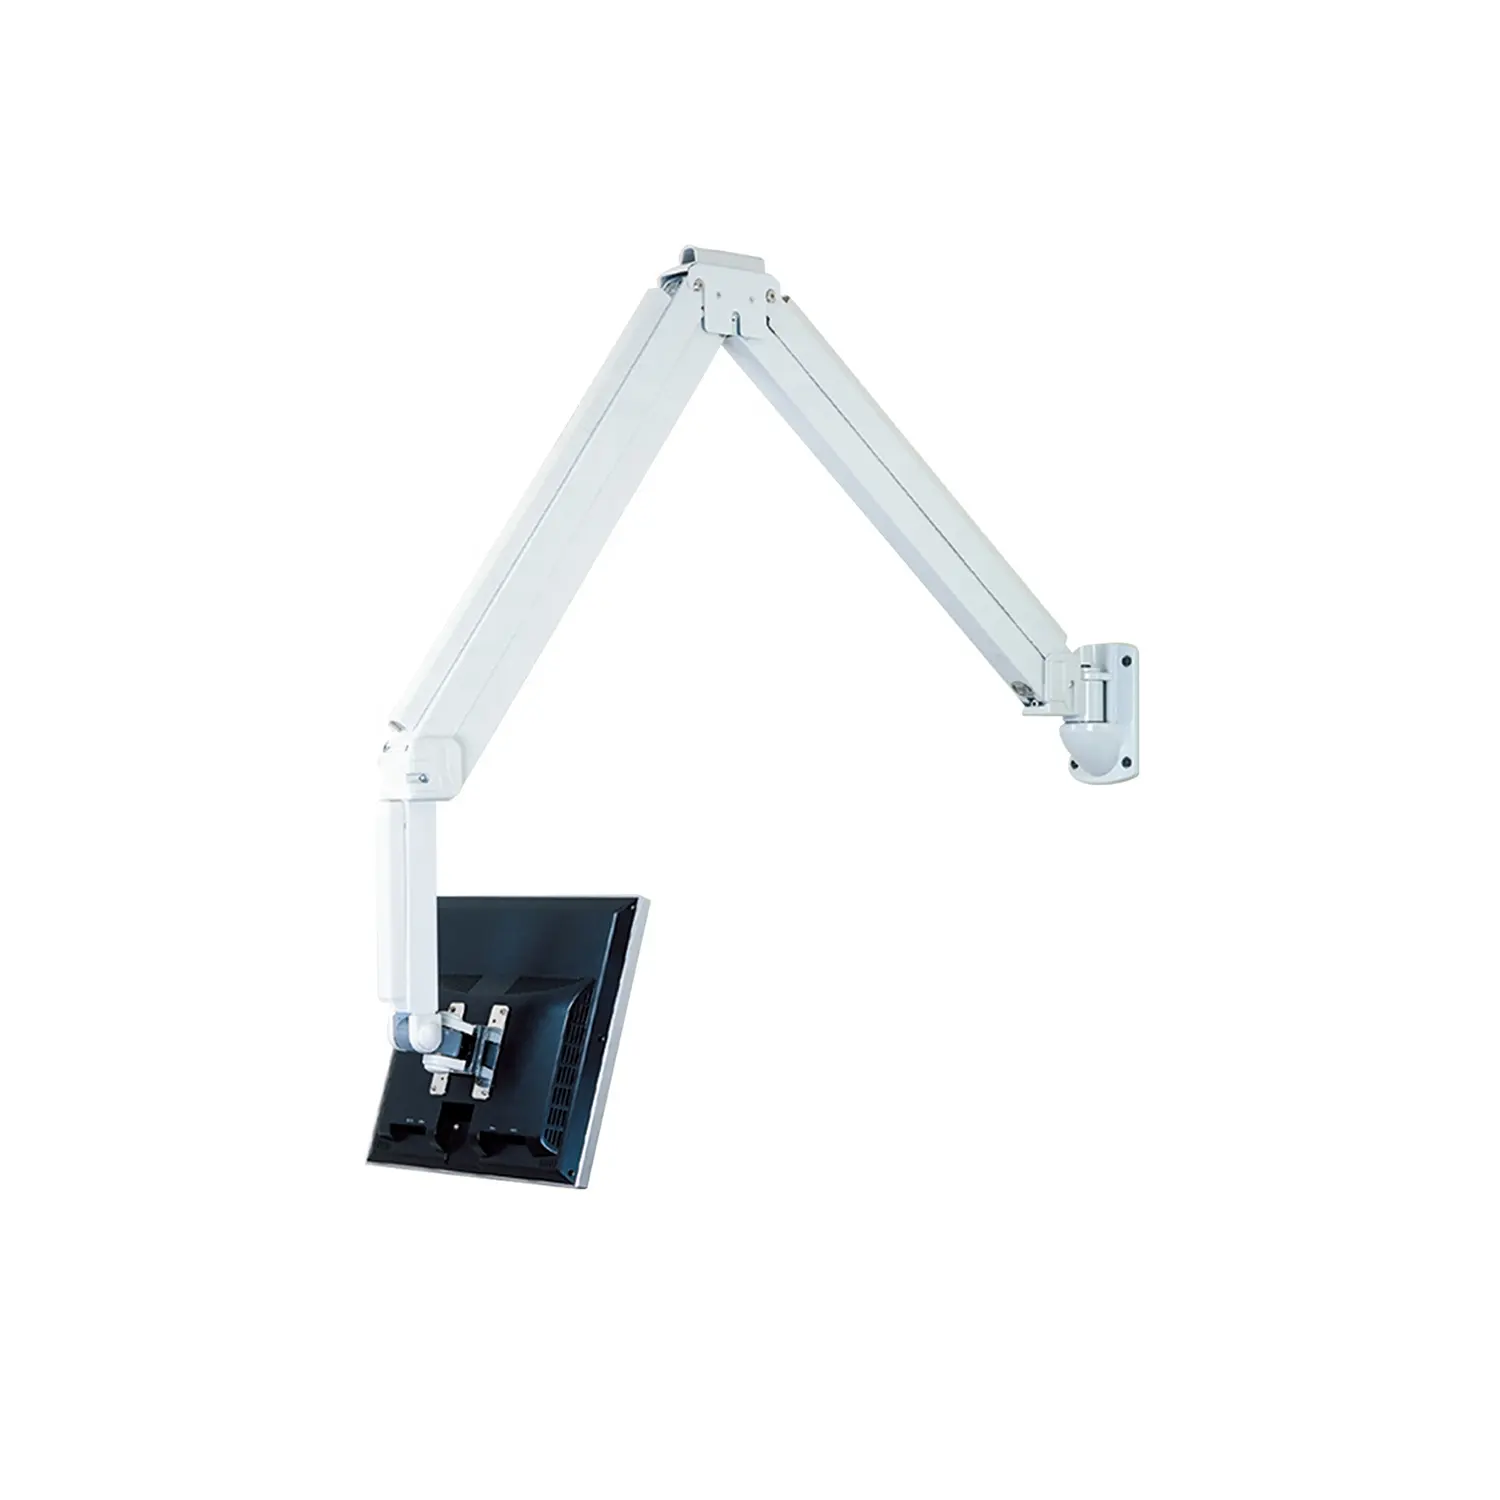 Slim Hospital LCD TV Monitor Arm with Wall Mount